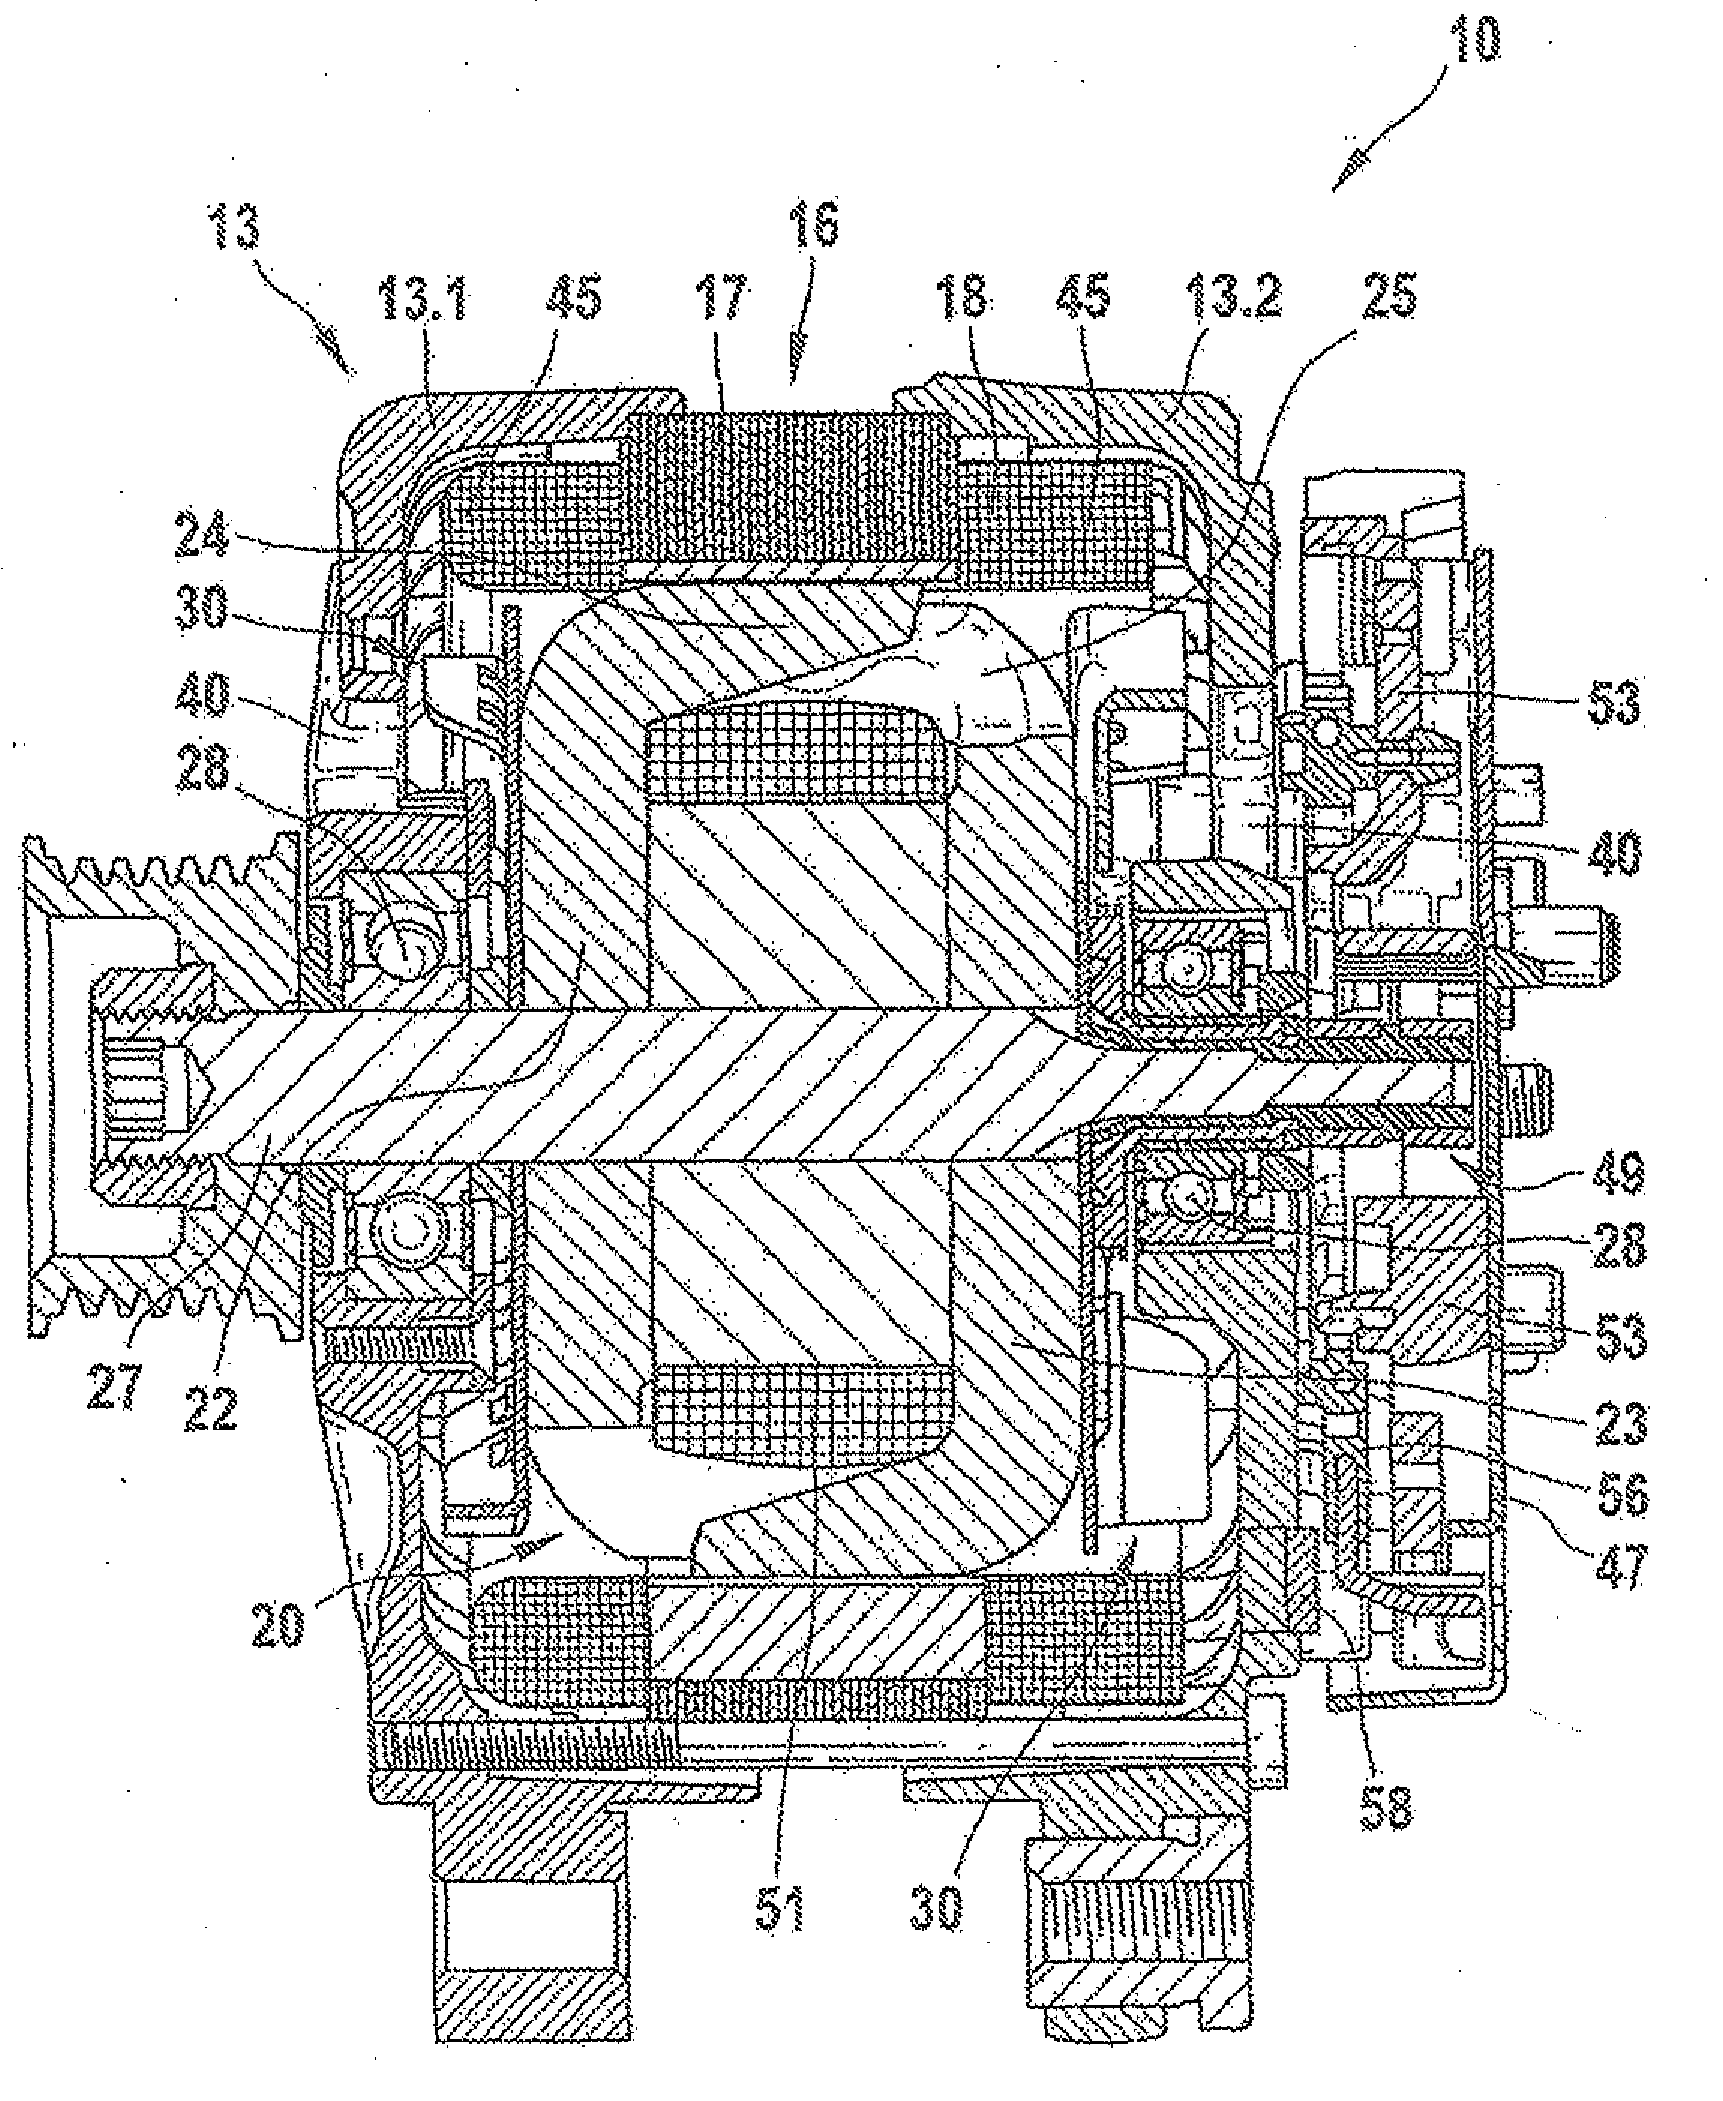 Electrical machine having a contact element for electrically connecting electrical components